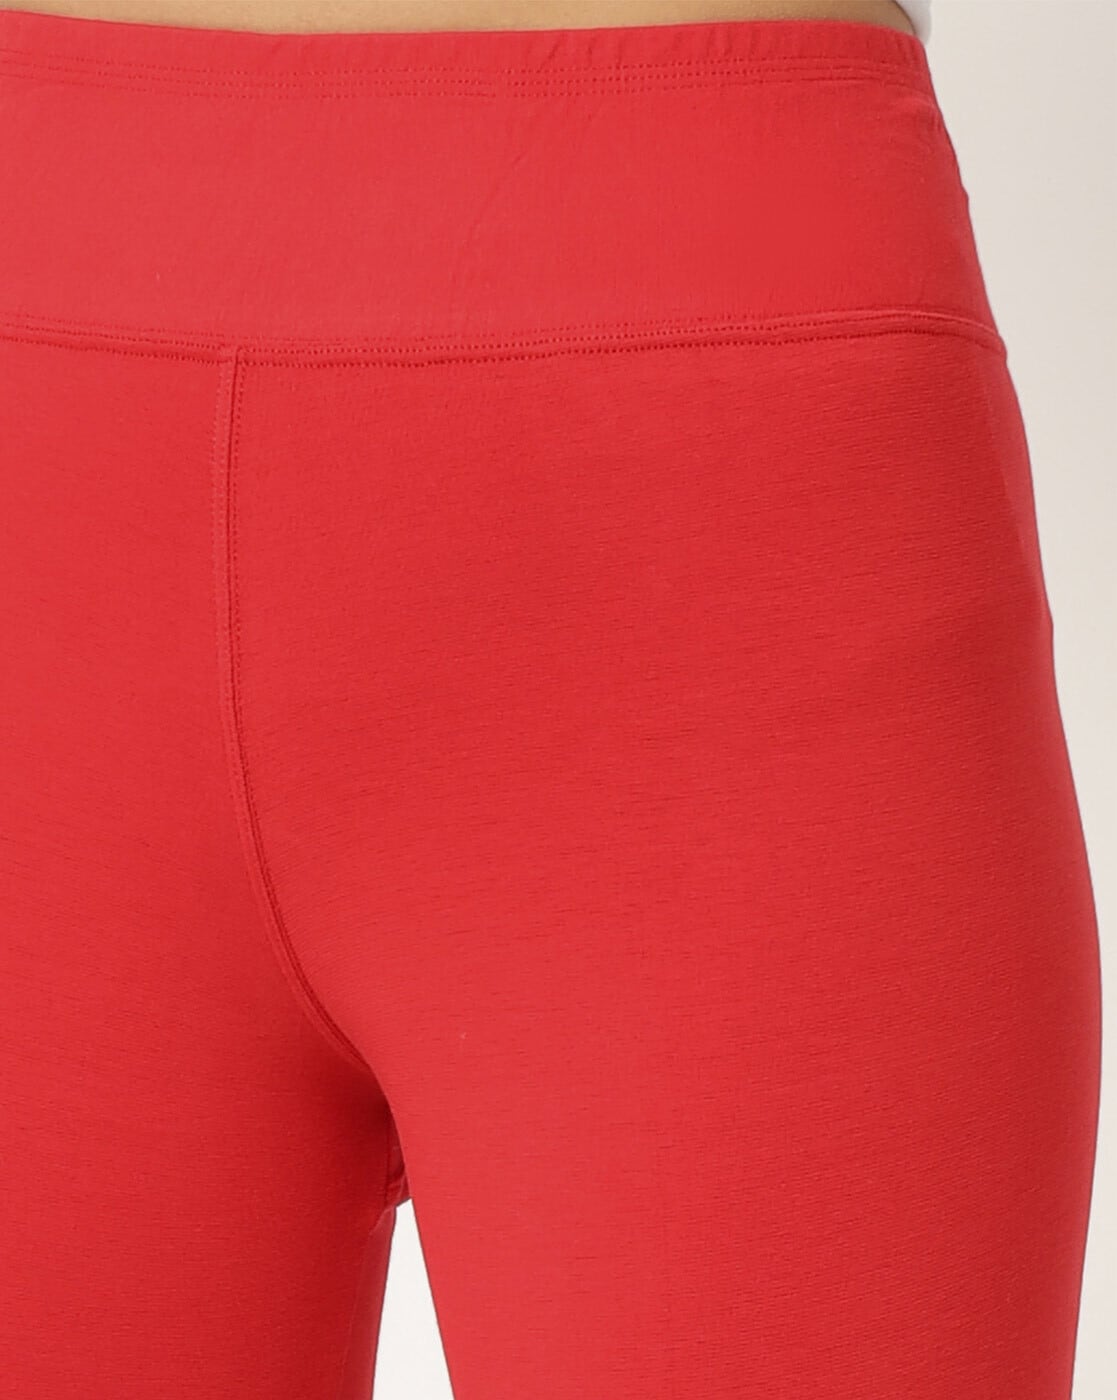 Adorna Active Leggings - Bloody Red